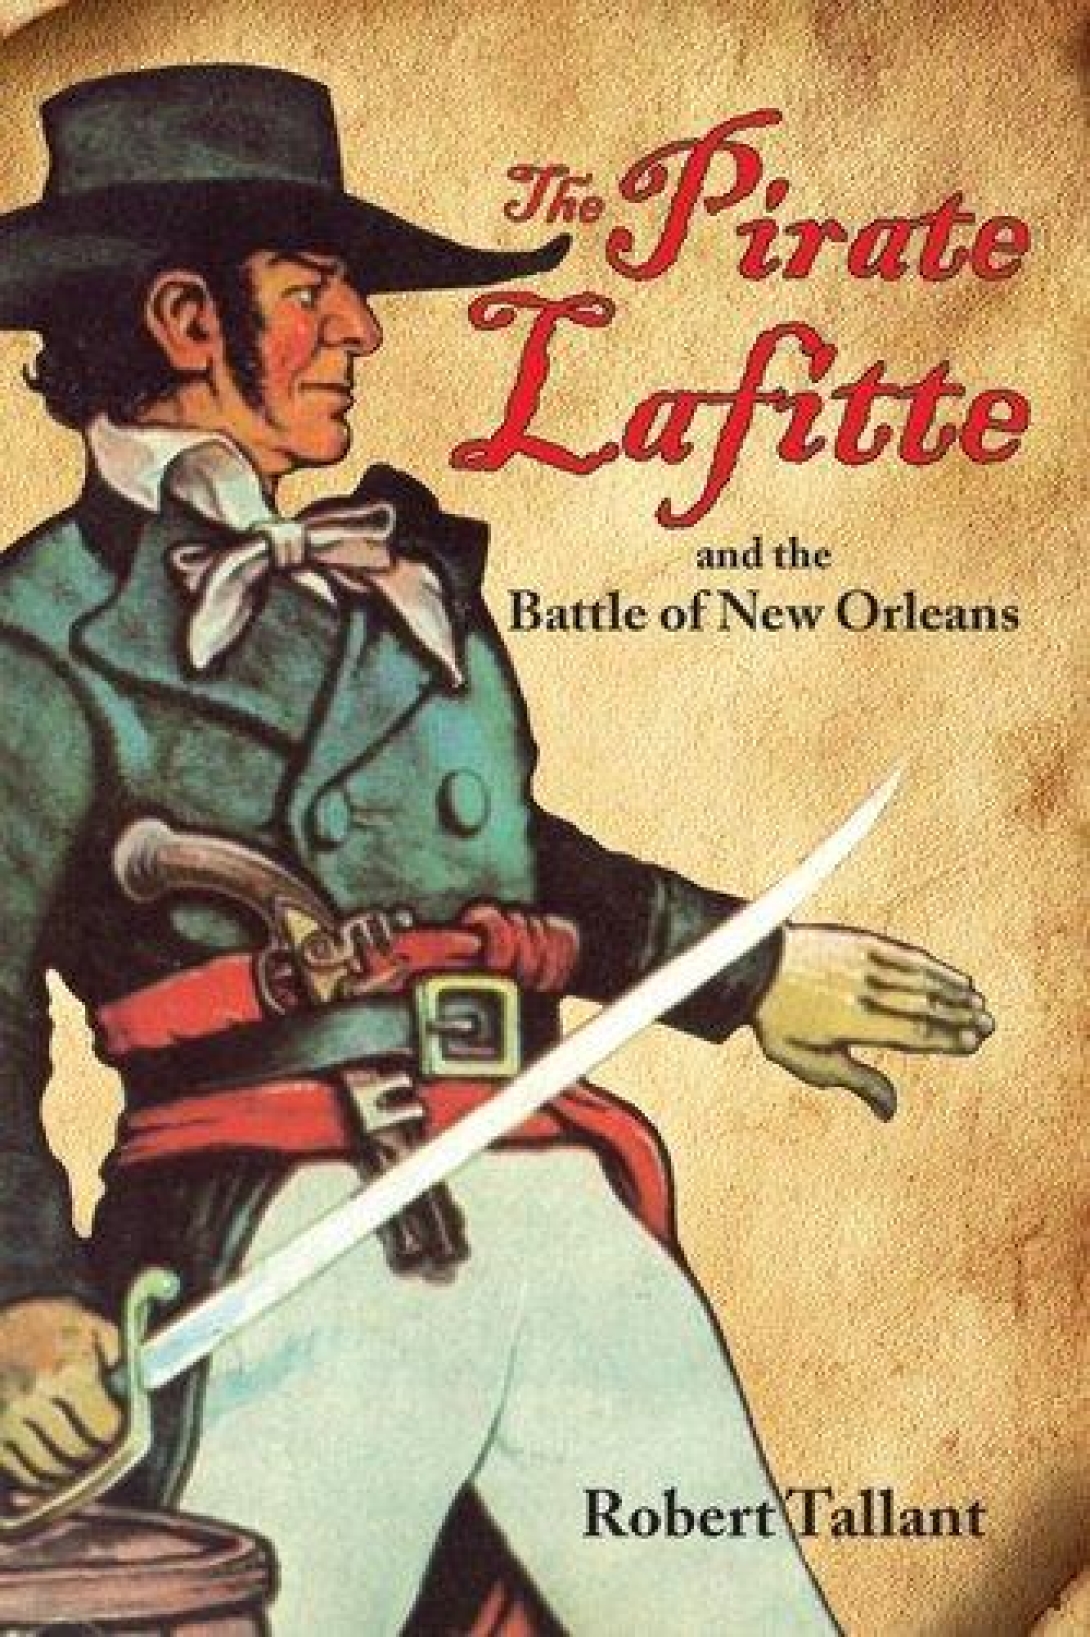 Pirate Lafitte and the Battle of New Orleans